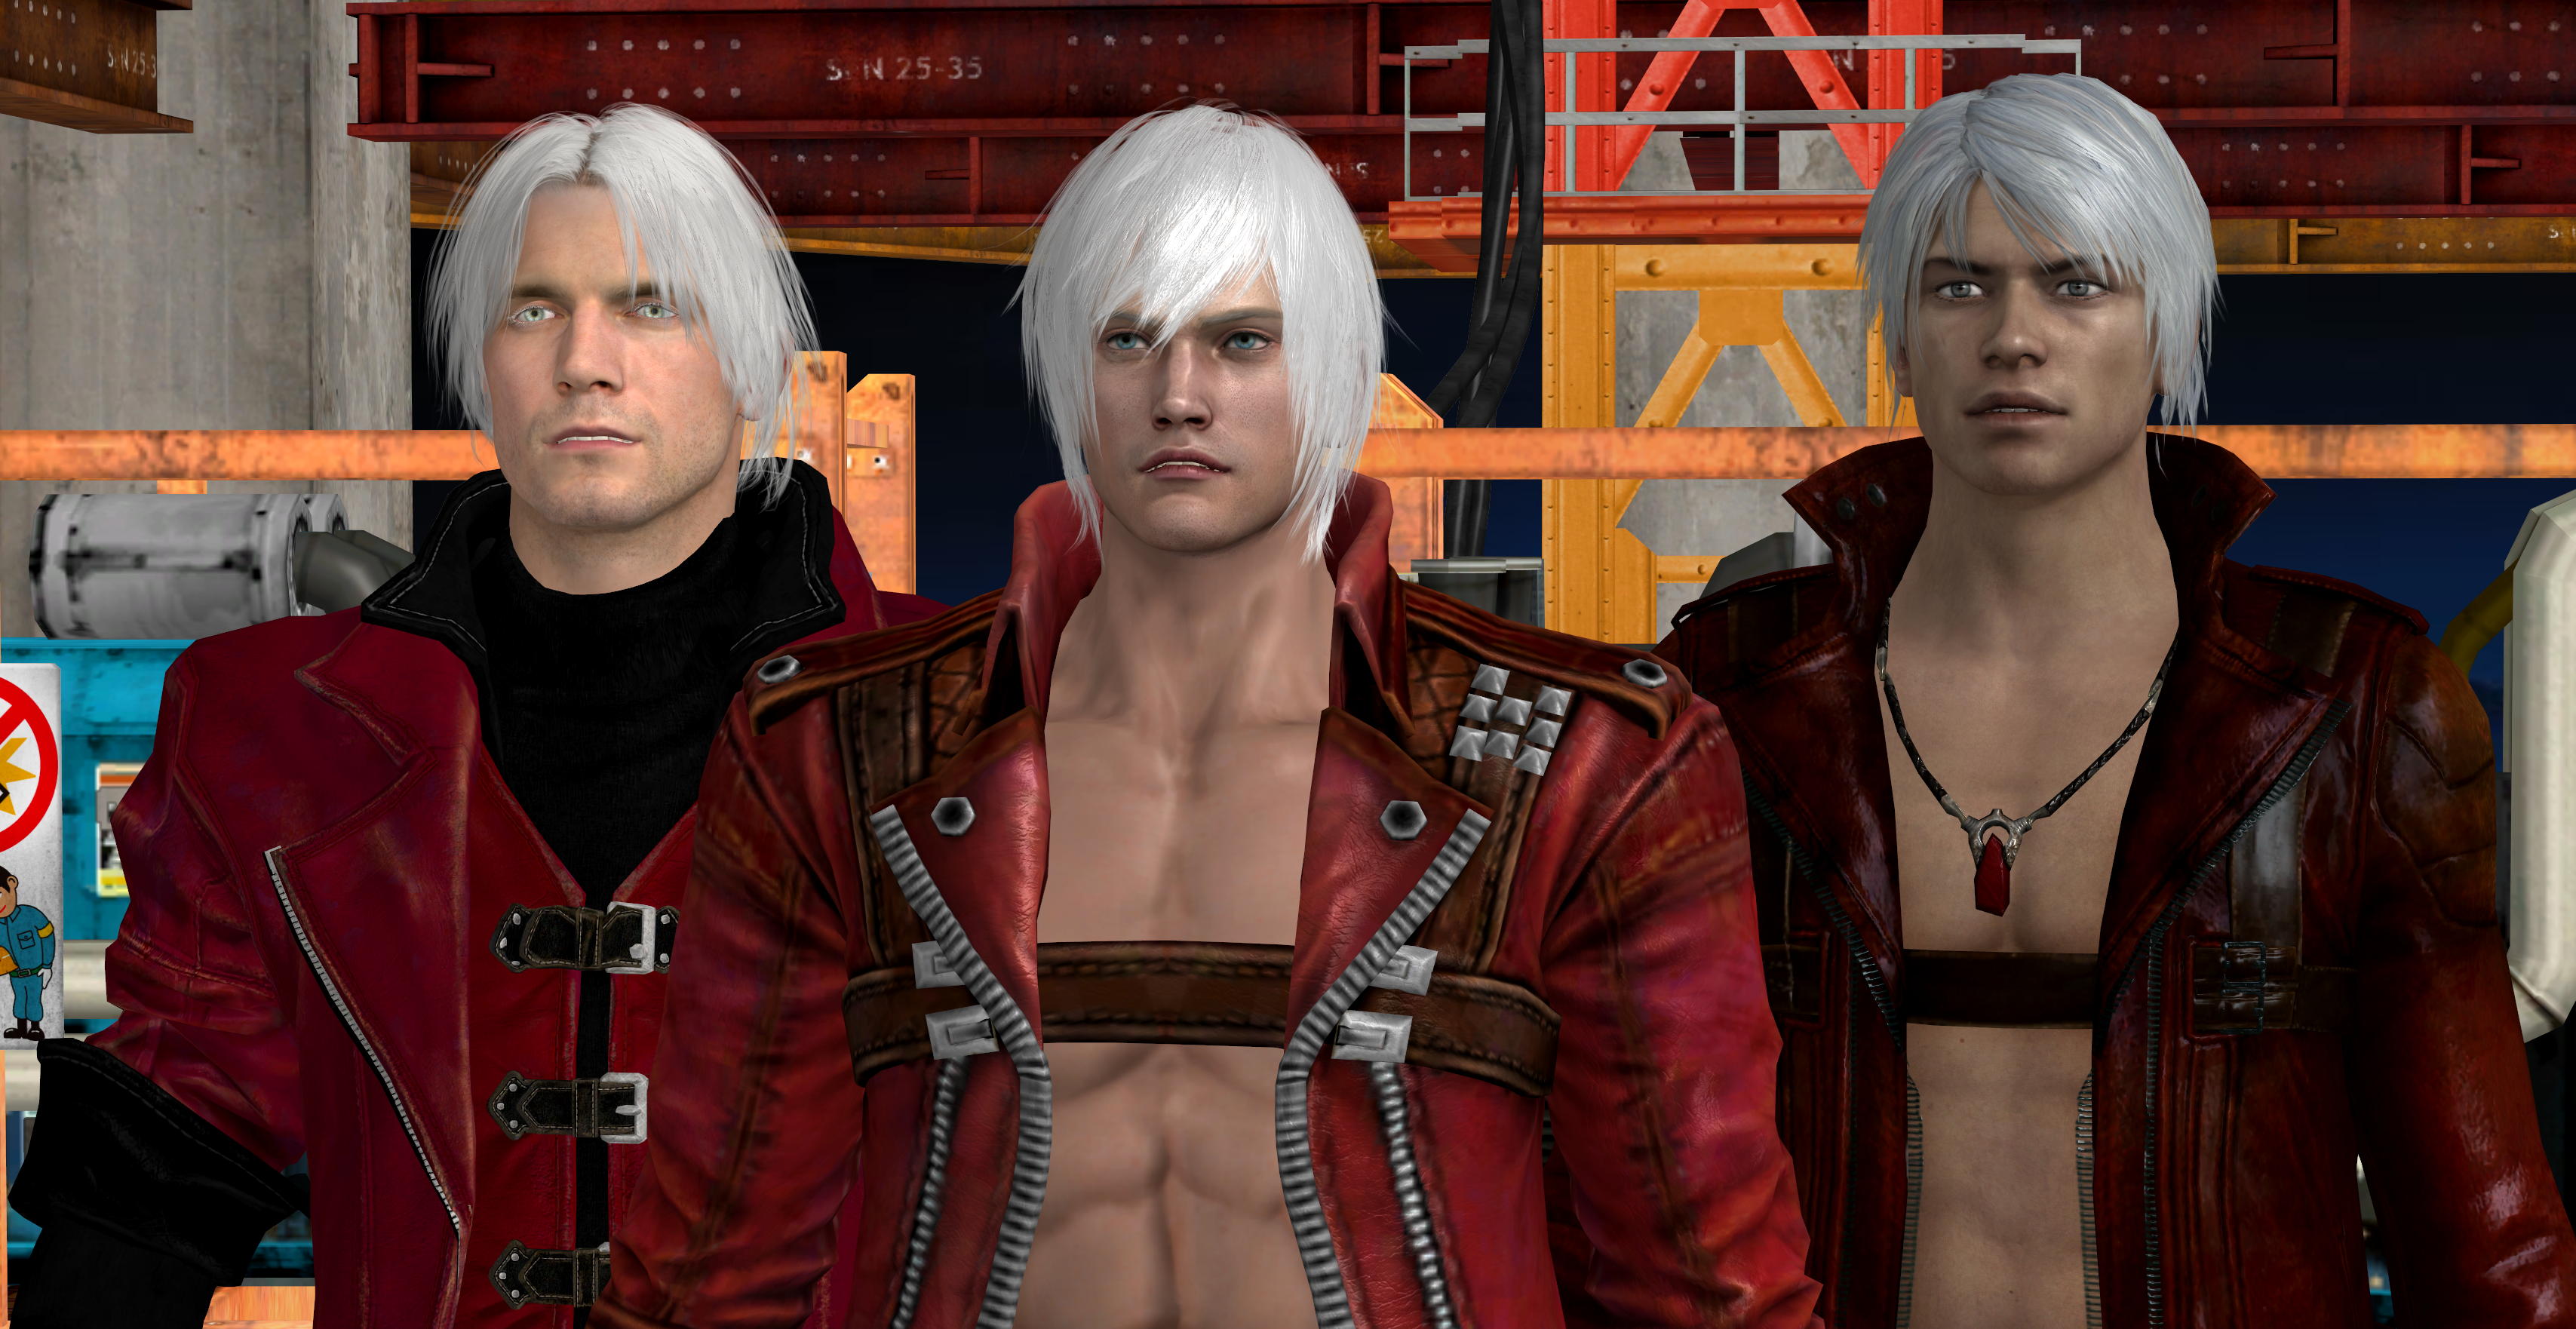 DMC3 Mod - Relive the Past by VampArtemis on DeviantArt